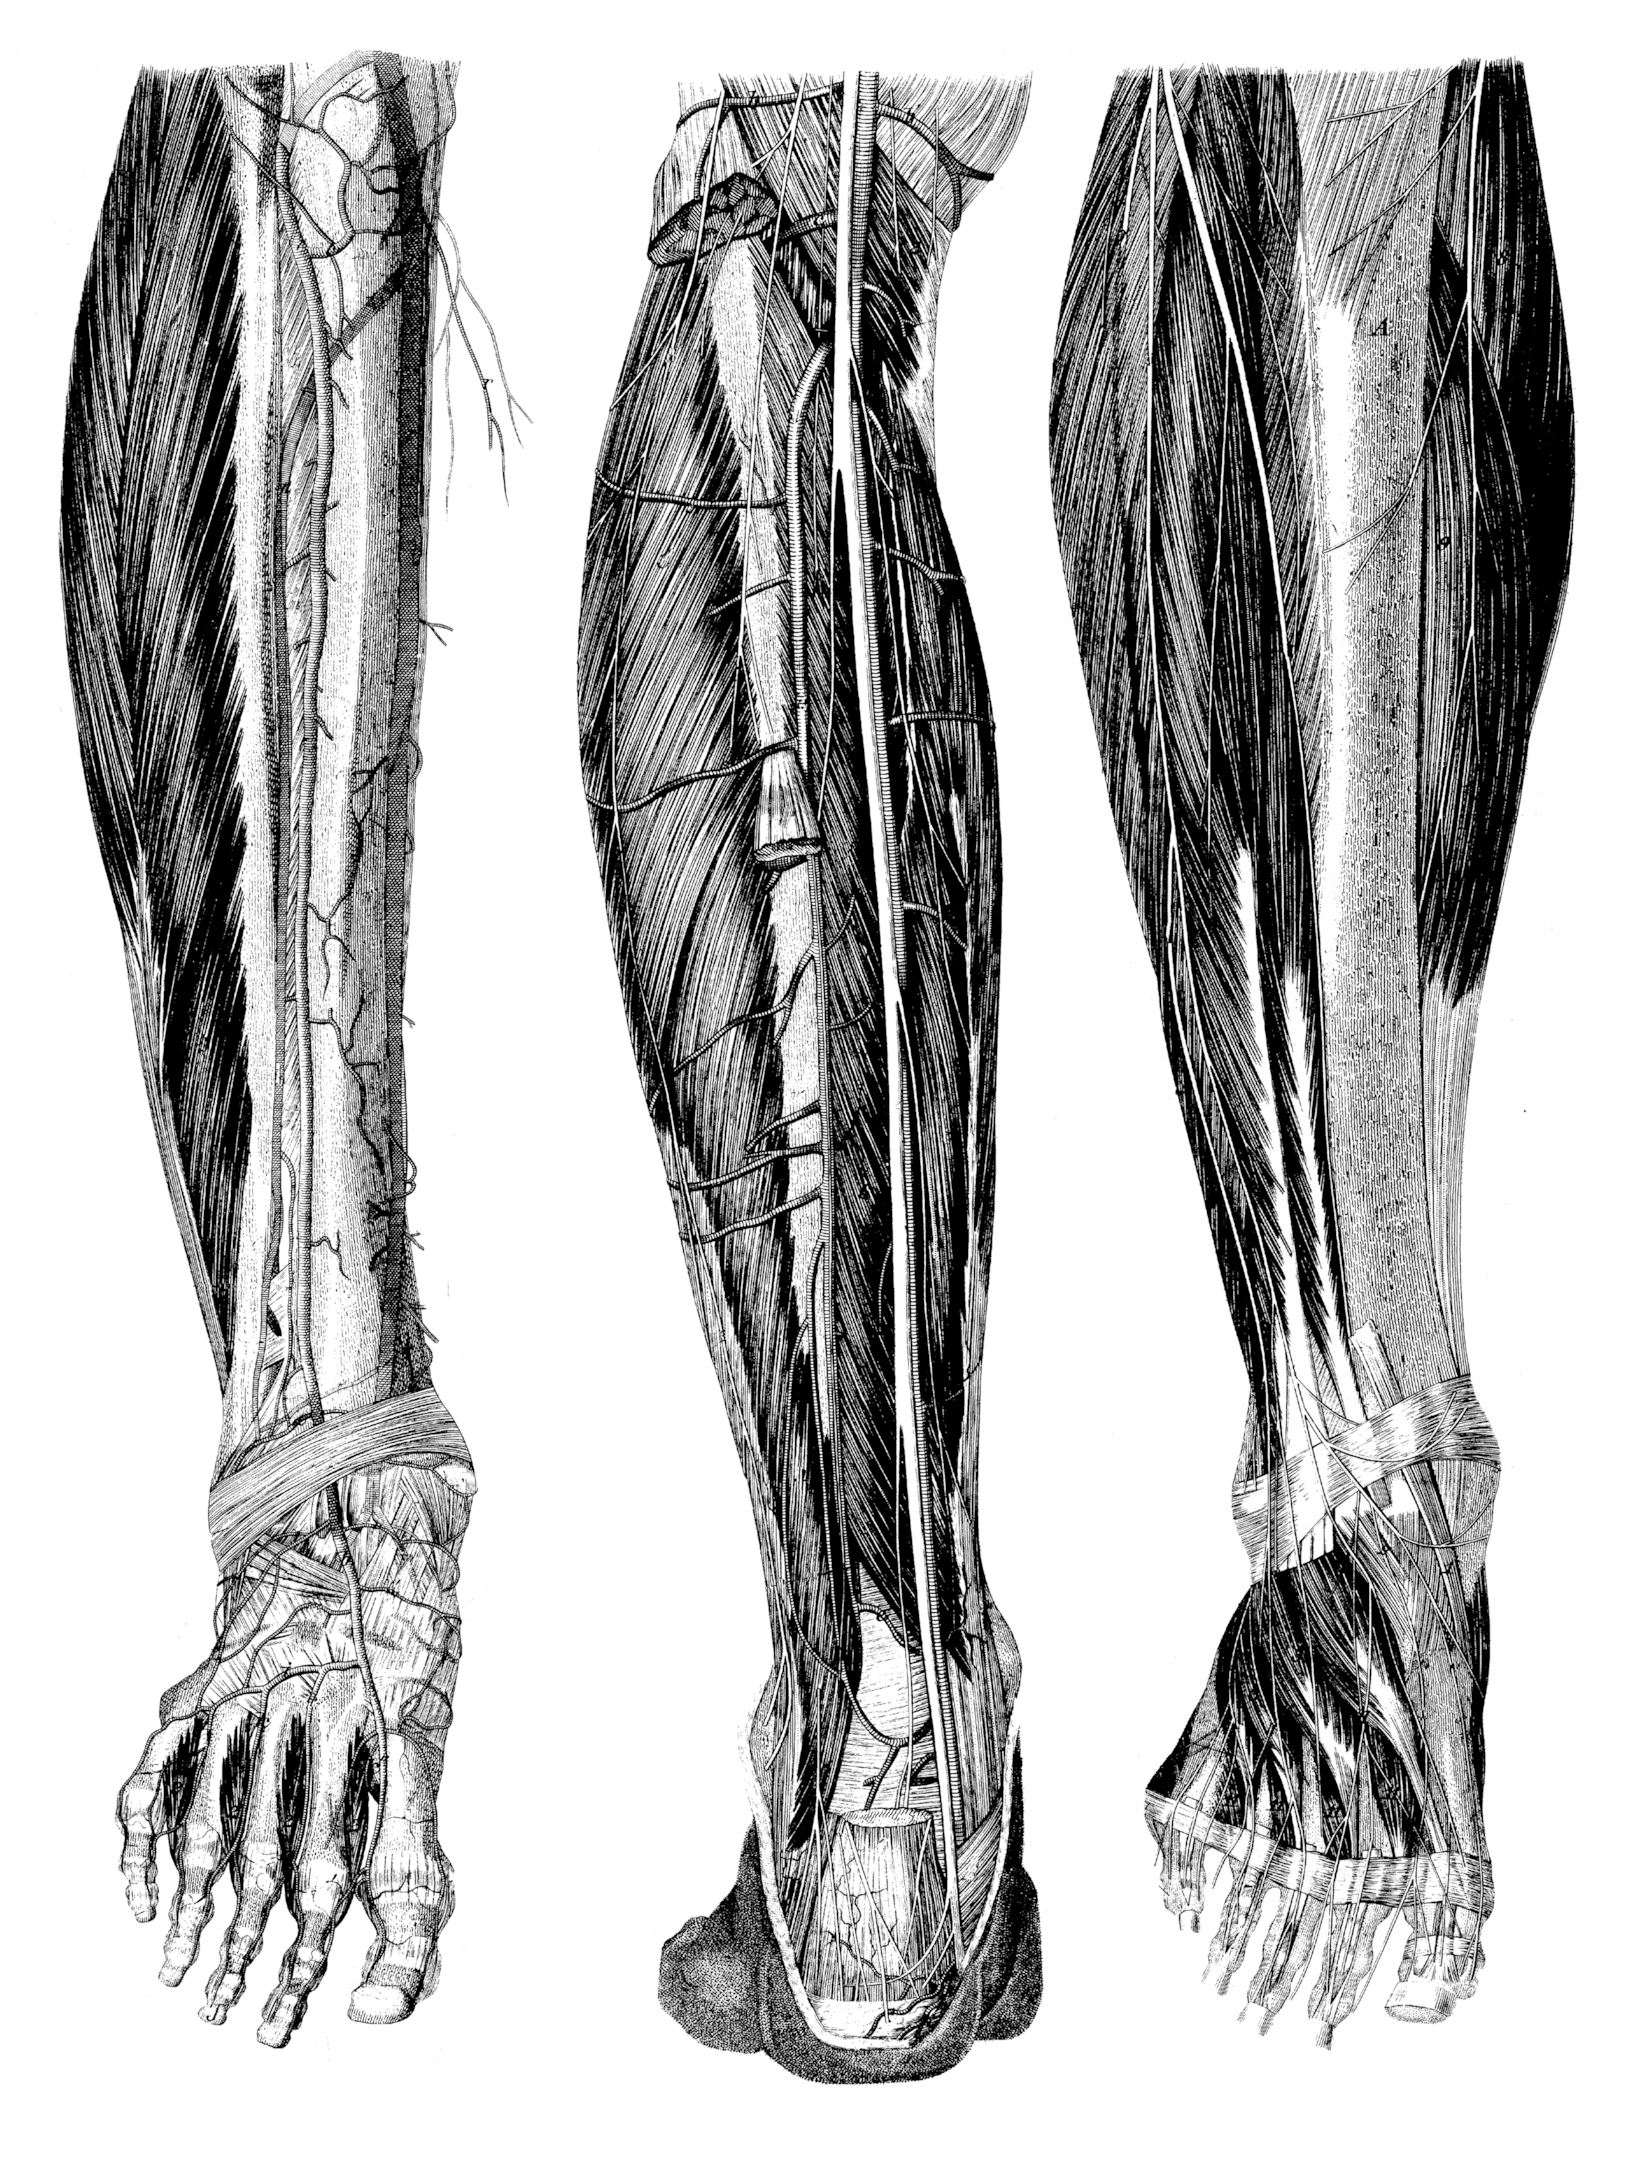 Anatomy of lower leg - foot tendons, tibialis anterior, calf muscles, top of the foot extensor sheath and flexor tendons from back of the leg view.